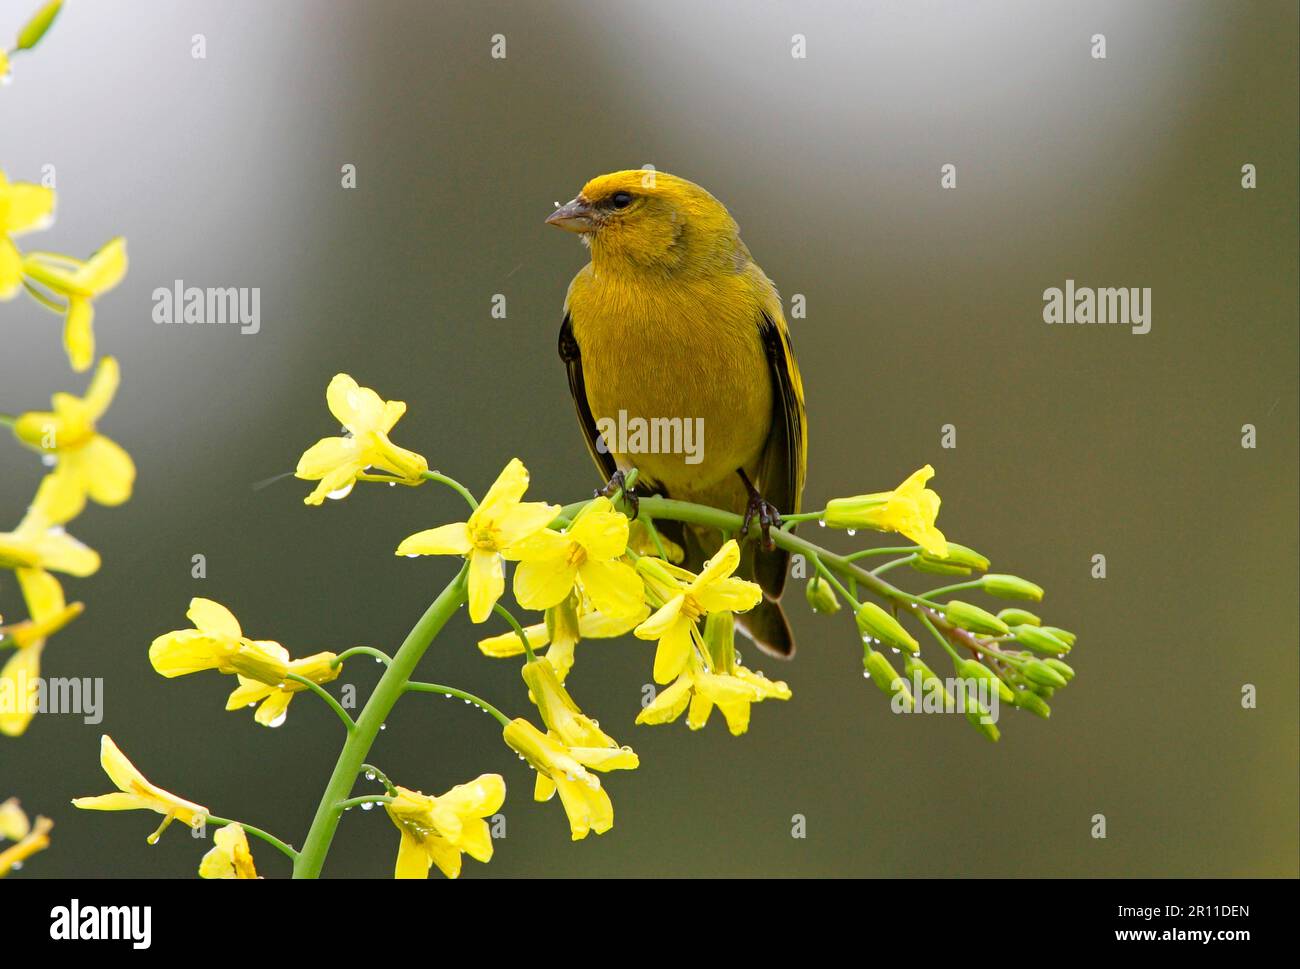 Yellow-crowned Canary, Yellow-crowned Canary, Cape Canaries, Songbirds, Animals, Birds, Finches, Yellow-crowned Canary (Serinus canicollis Stock Photo